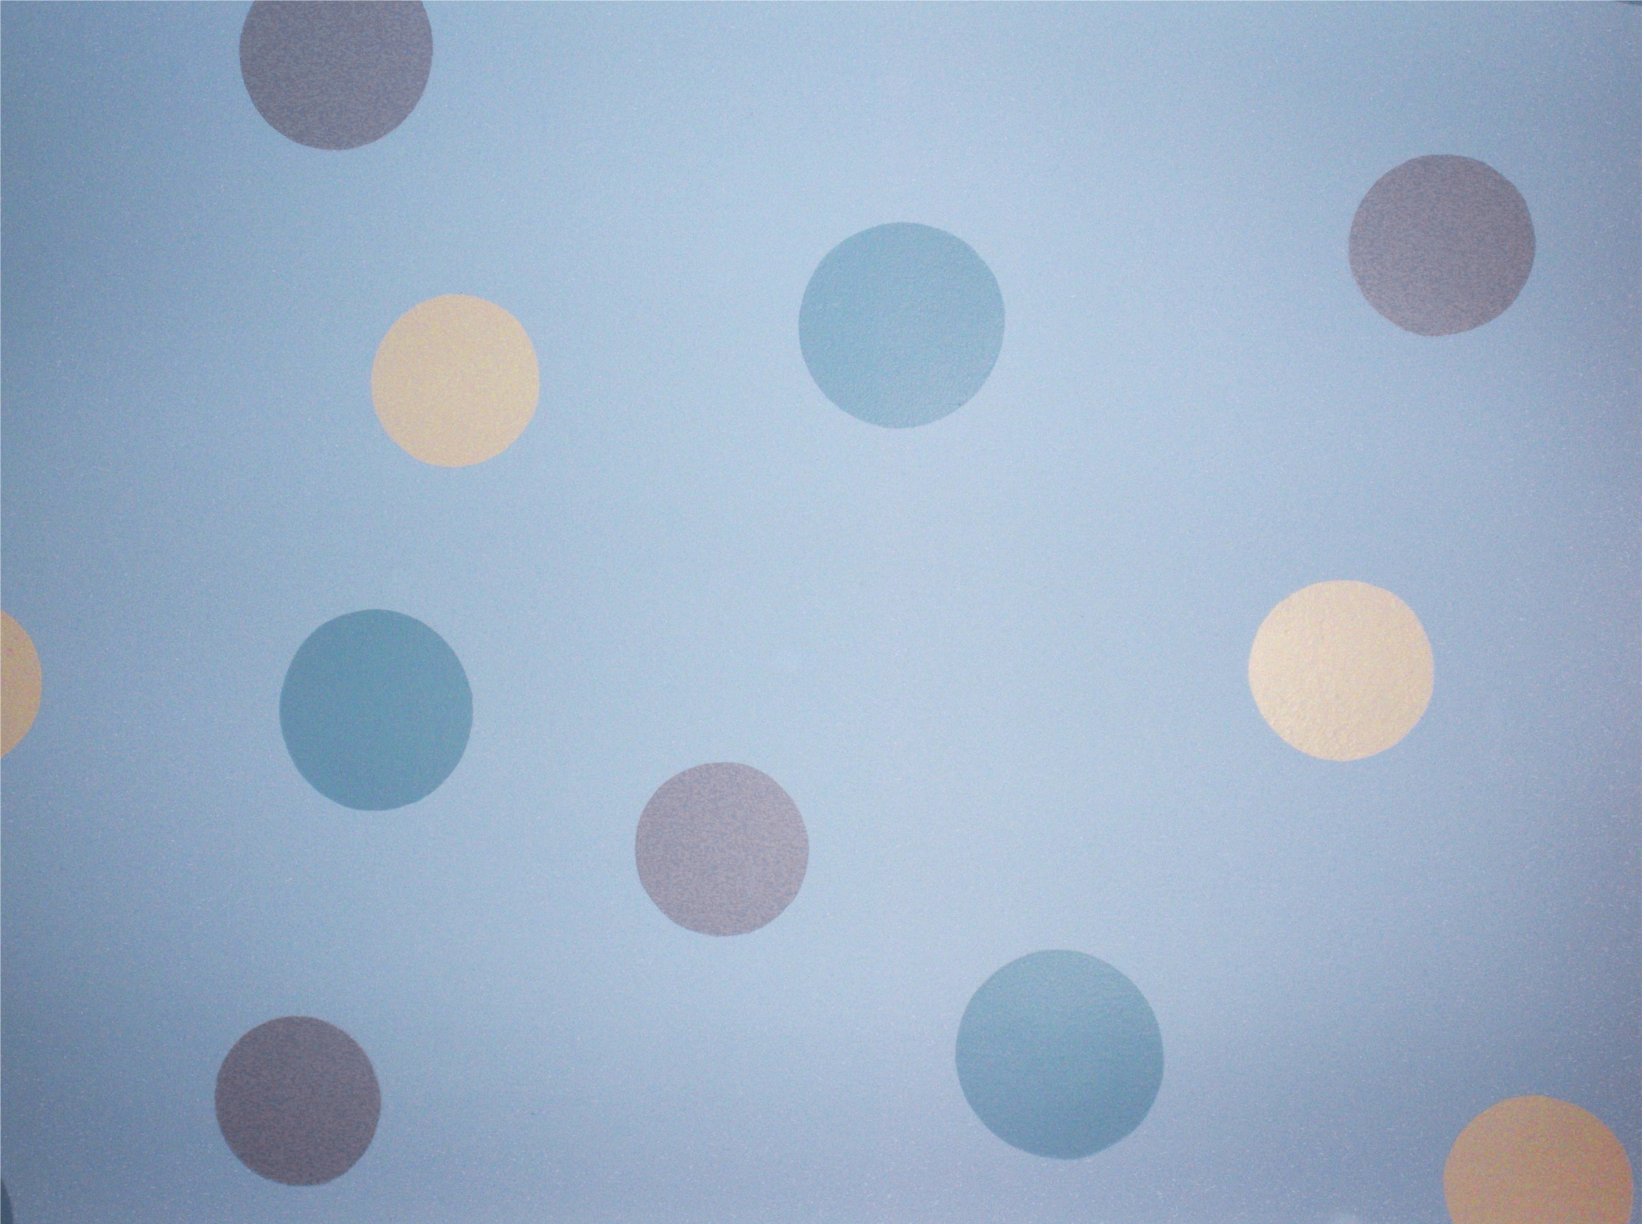 I'm a creative polka dot faux finish on a solid background.